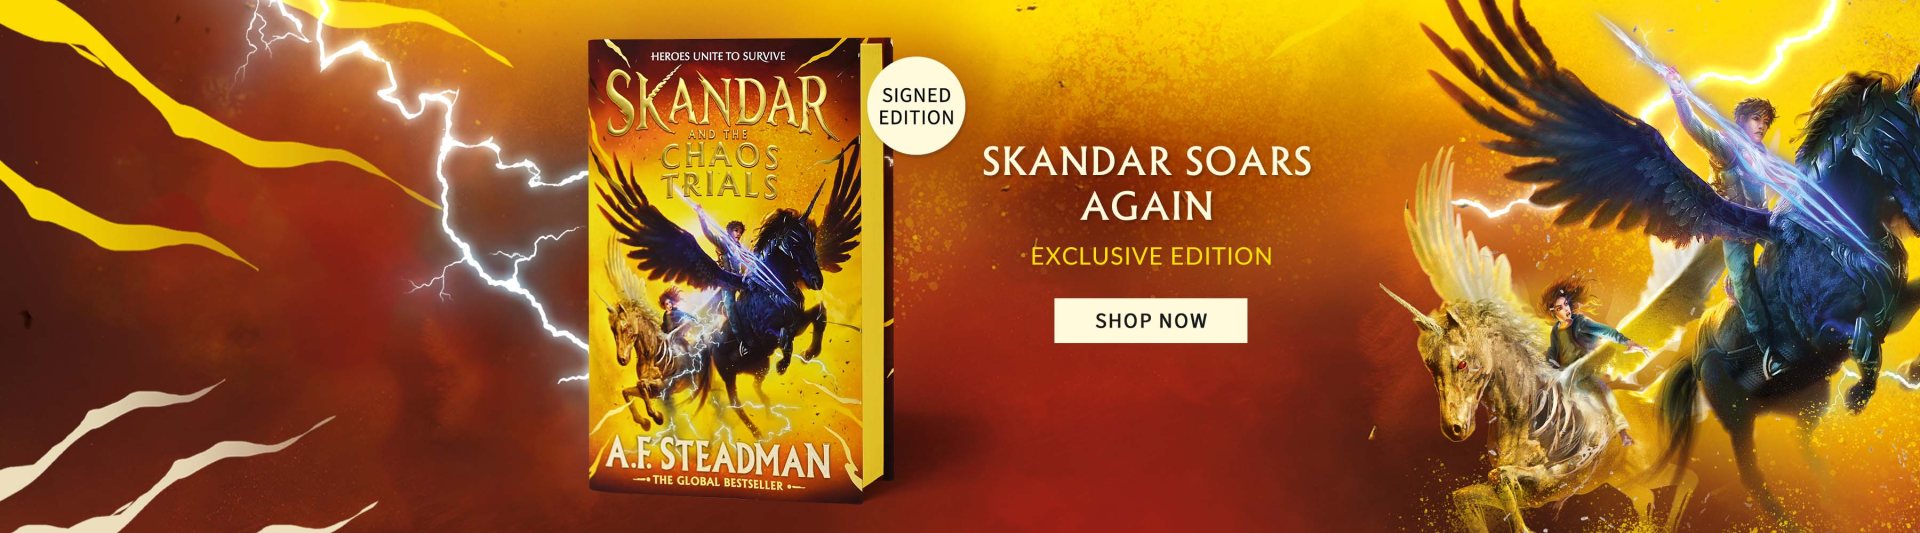 Skandar and the Chaos Trials by A.F. Steadman SIGNED | SHOP NOW